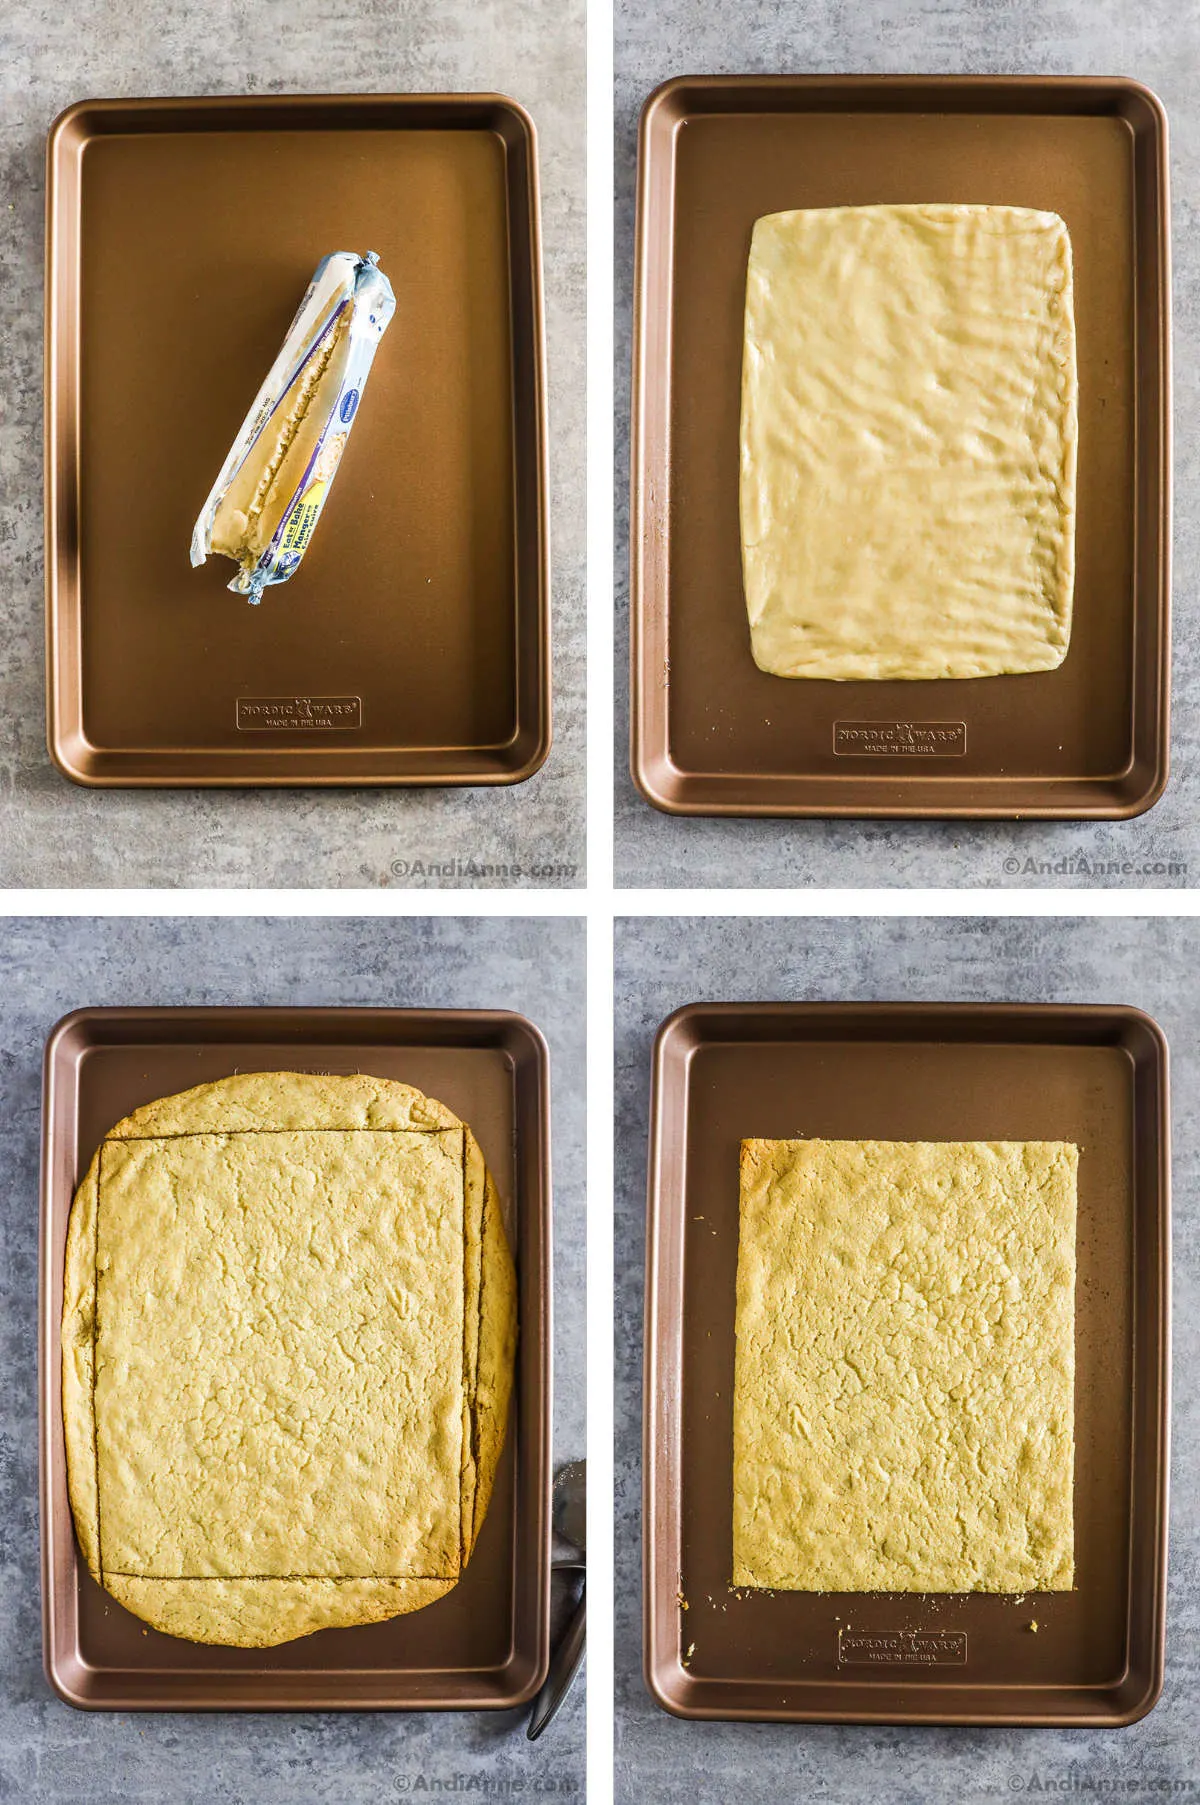 Four overhead images in one: 1. Cookie dough in opened package on baking sheet. 2. Cookie dough spread flat into a rectangle shape. 3. Cookie dough is baked and a line is cut on all four sides making a rectangle with straight edges 4. Cookie dough is baked and edges are trimmed and cleaned off.